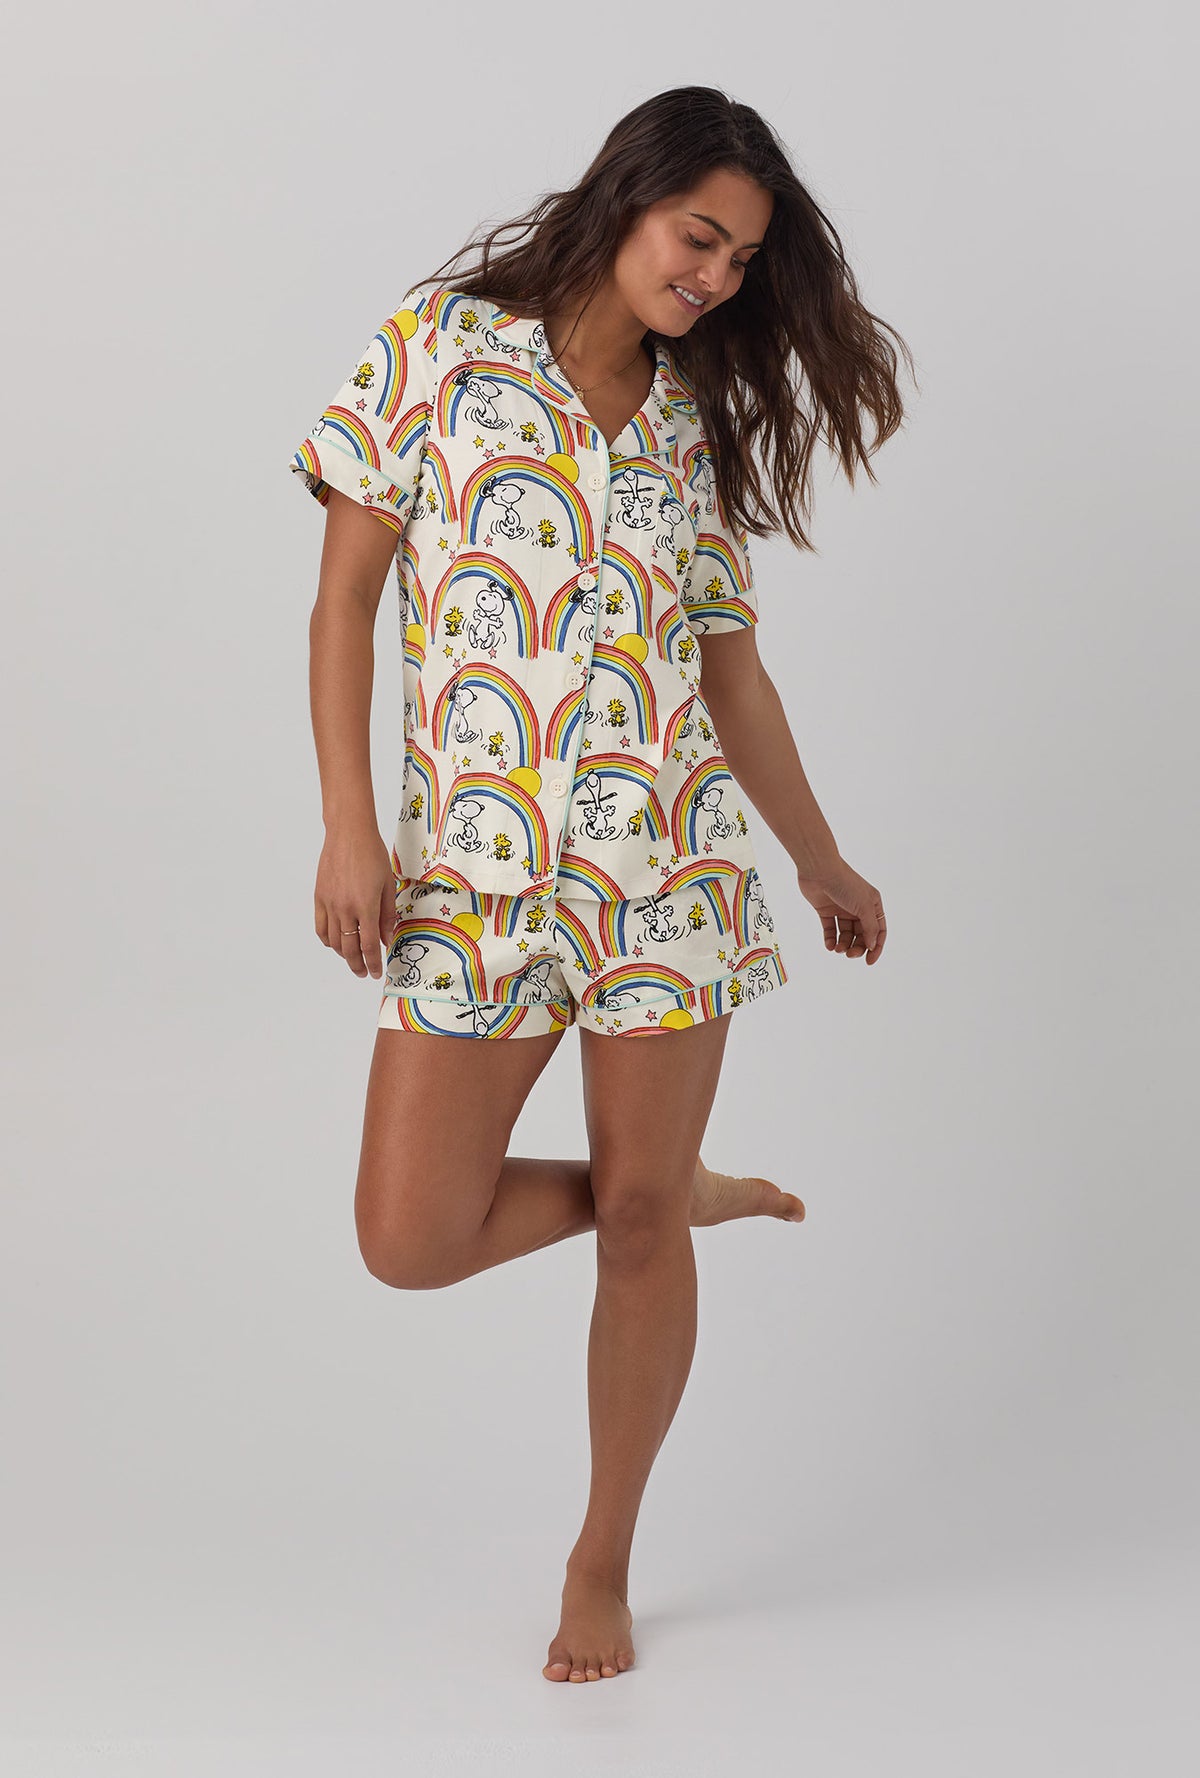 A lady wearing white Short Sleeve Classic Shorty Stretch Jersey PJ Set with Sunshine Snoopy  print.